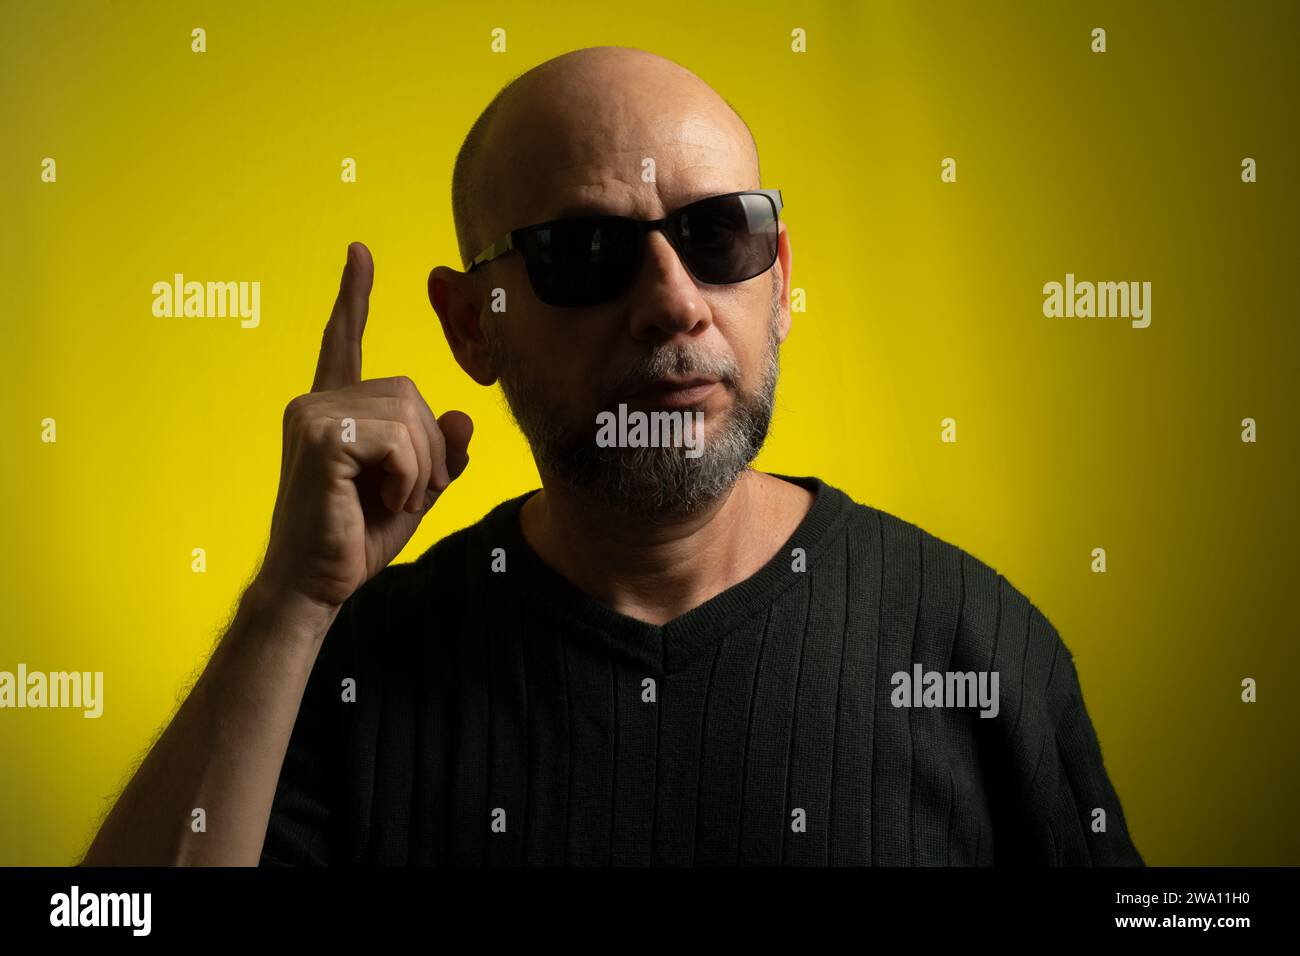 Portrait of bald, bearded mature man wearing sunglasses making sign with his hands. Isolated on yellow background. Stock Photo